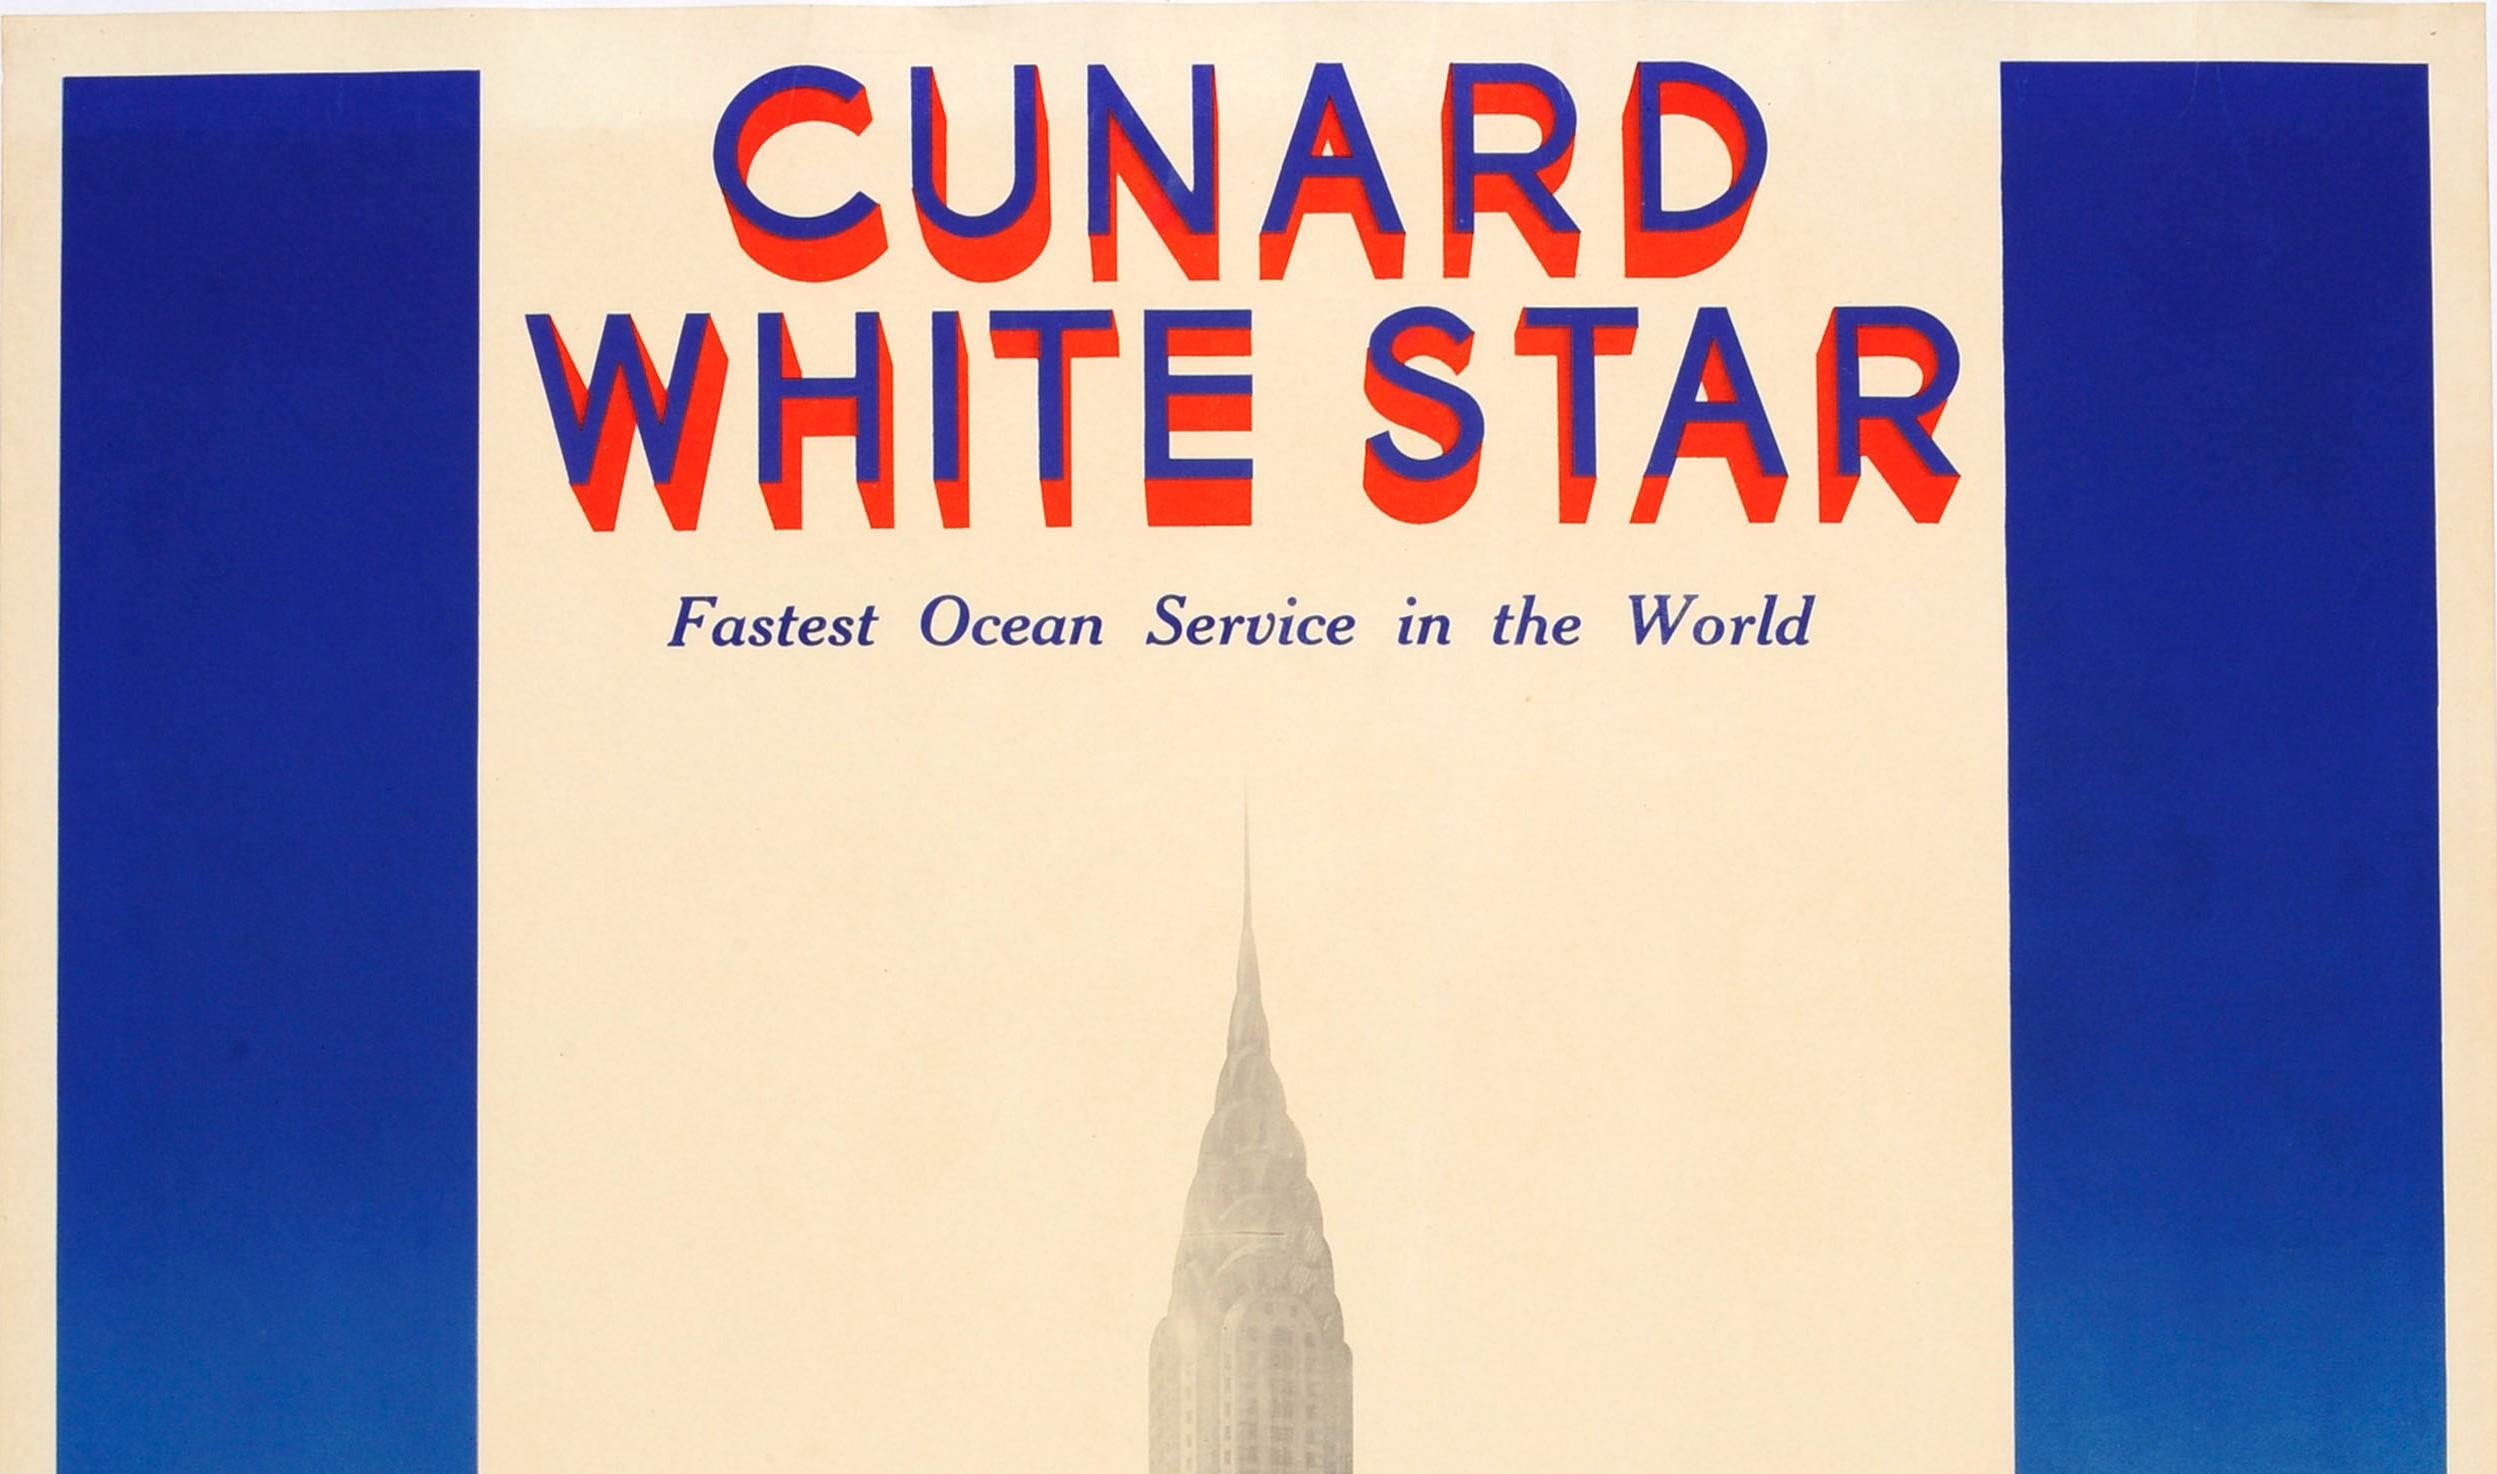 Original vintage travel advertising poster for Cunard White Star Fastest Ocean Service in the World. Stunning Art Deco style illustration of the two majestic flagship transatlantic ocean liners, the RMS Queen Mary and the RMS Queen Elizabeth,